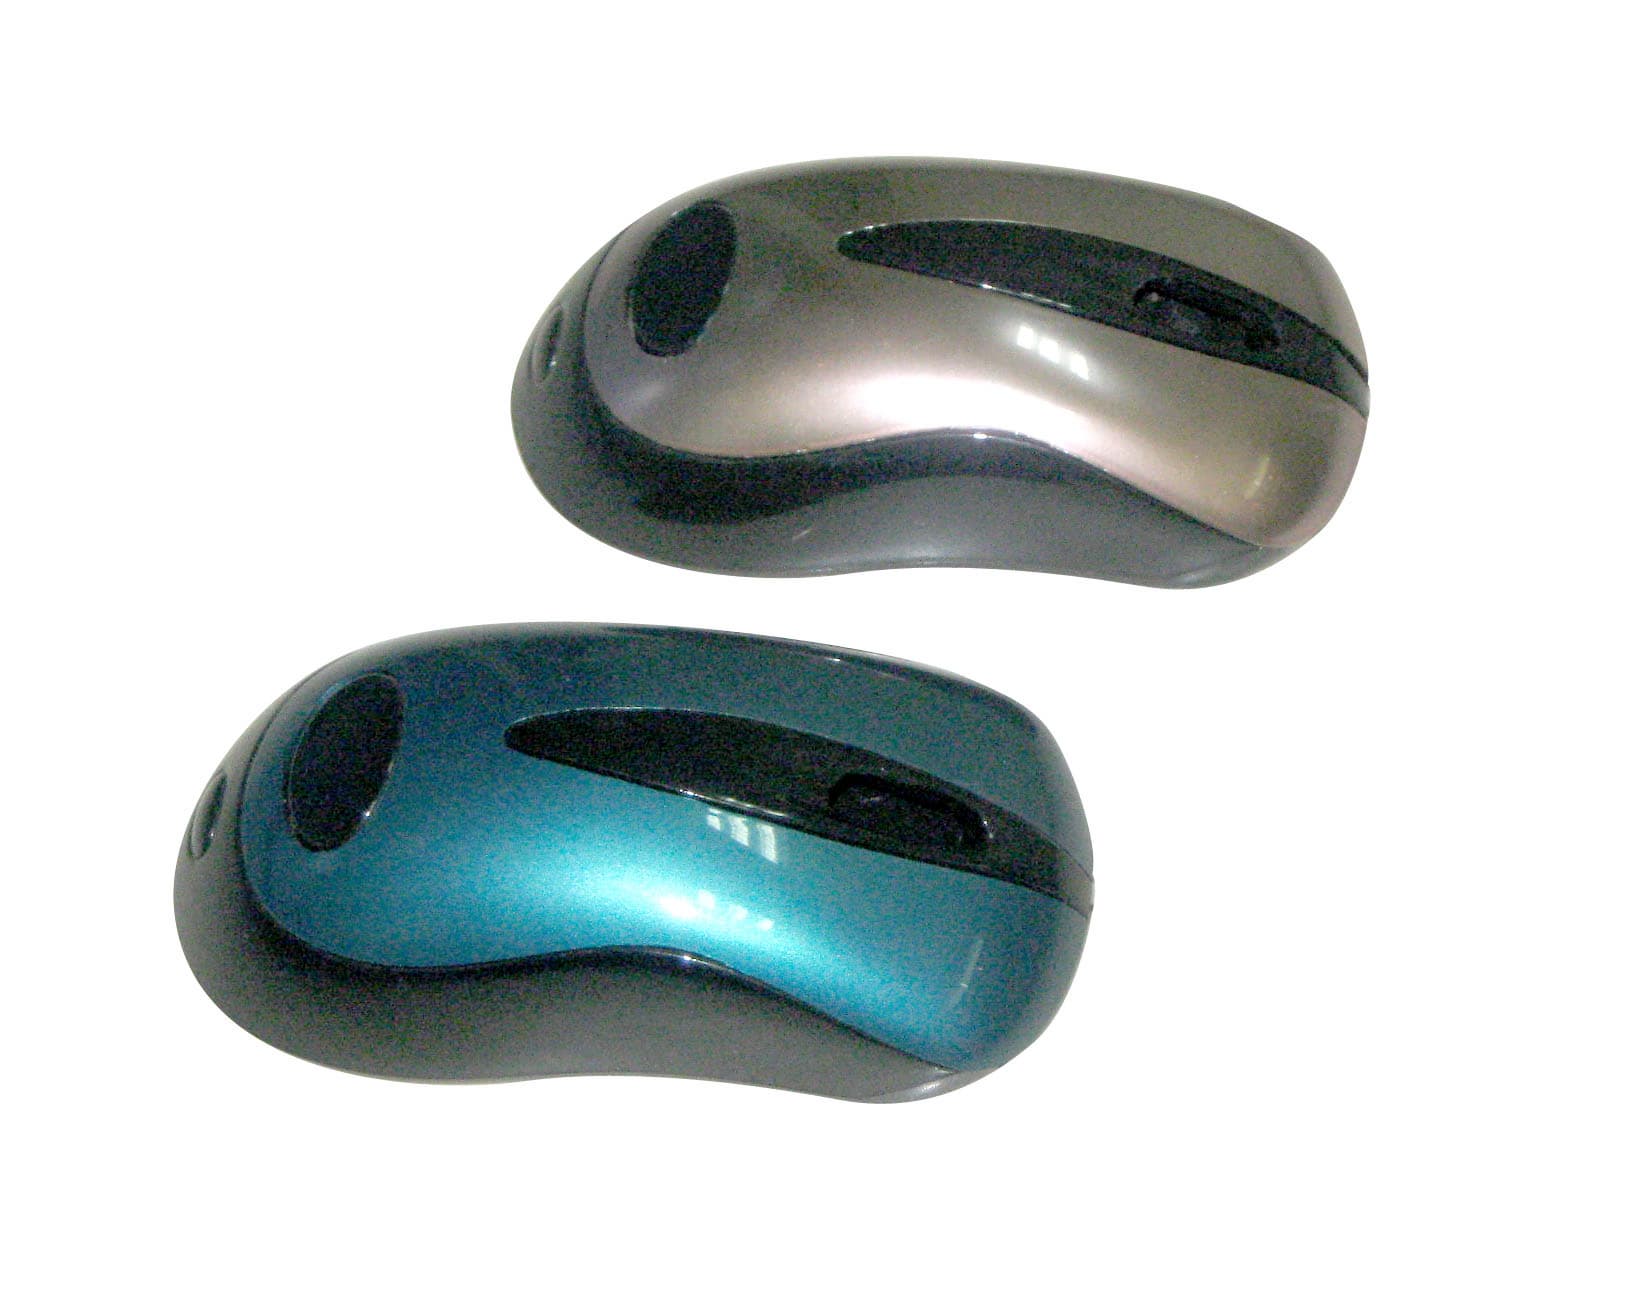 Mouse_ custom wireless mouse_ mouse mould_ plastic molding_